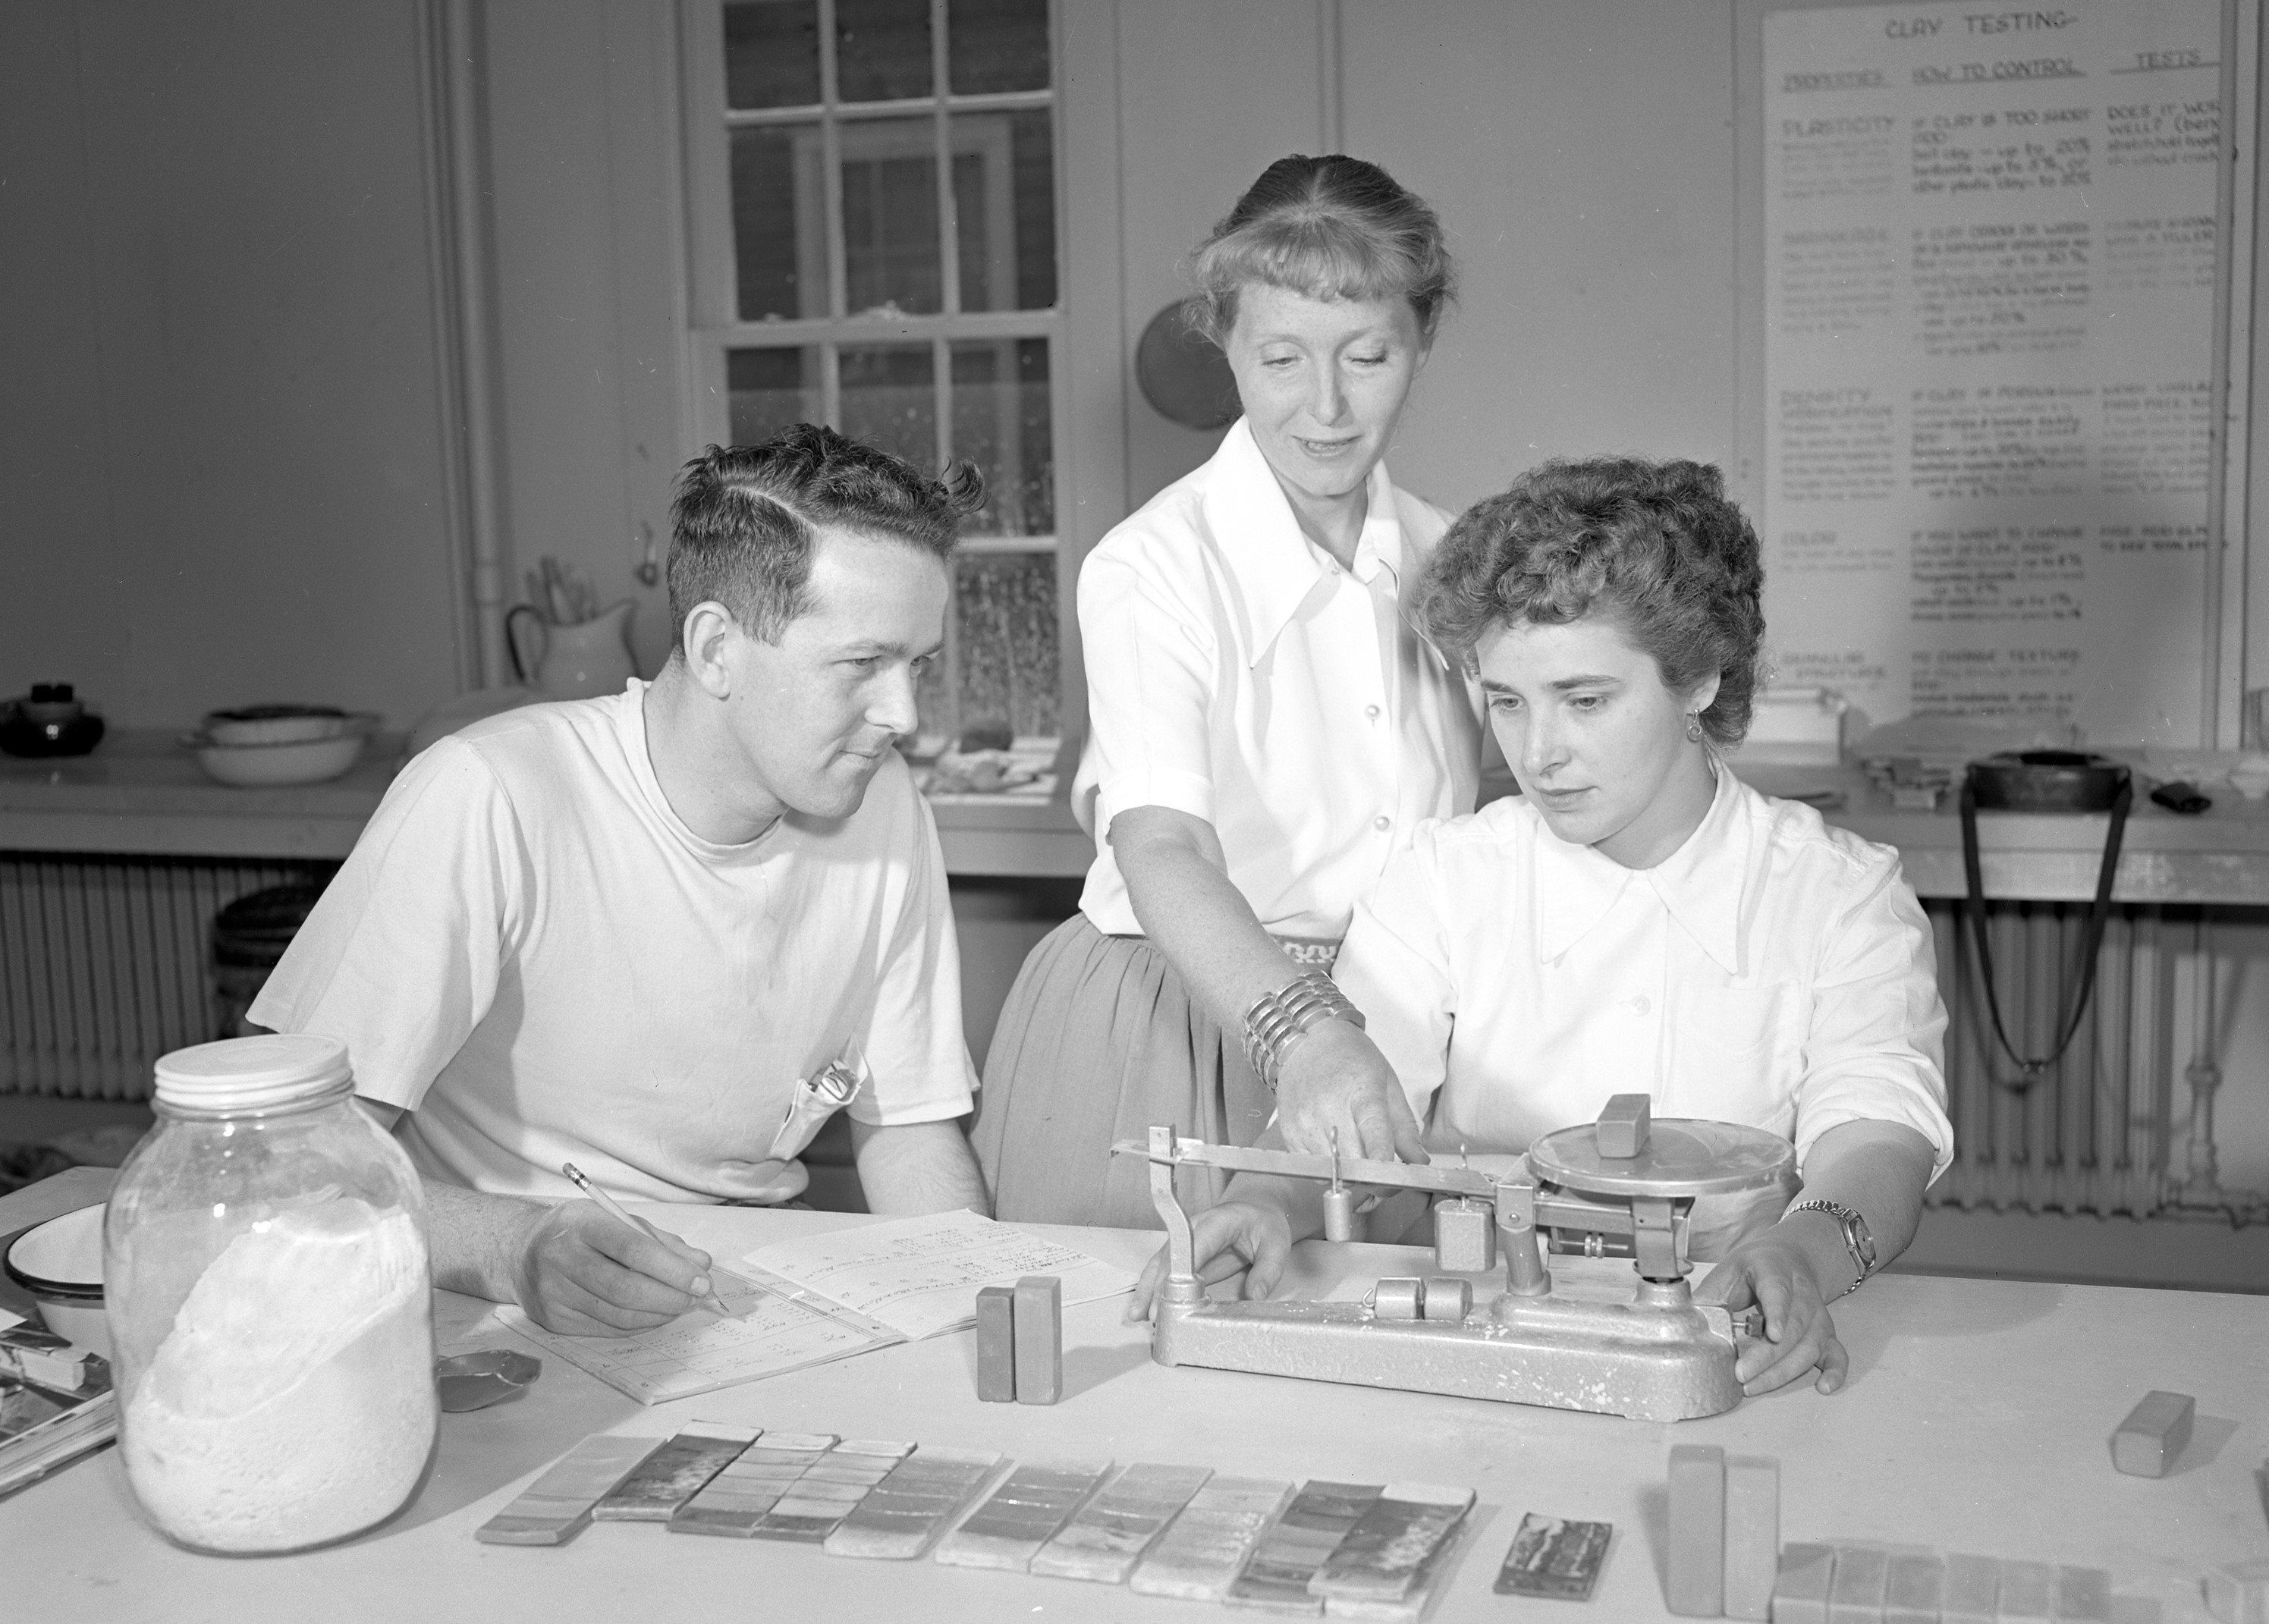 Black and white photograph of three people, one standing in between the other two, in front of a table with ceramic pieces on it.